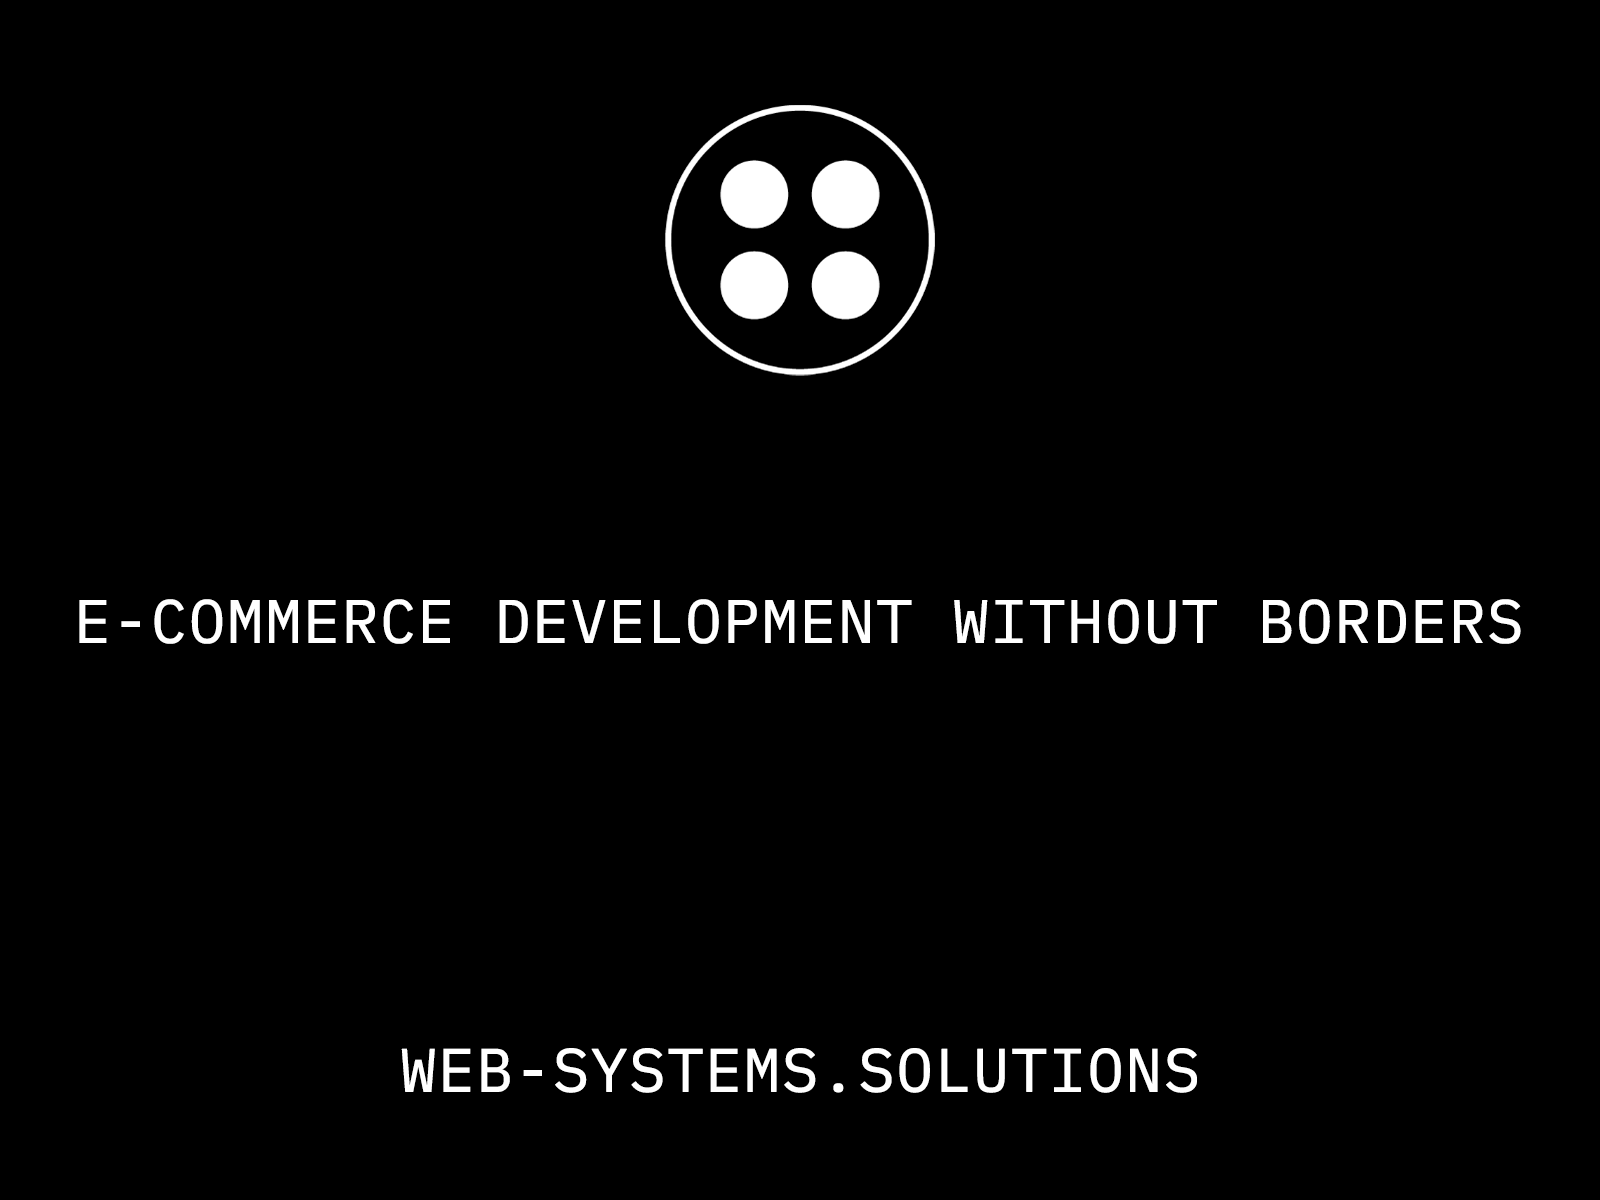 Web-Systems Solutions